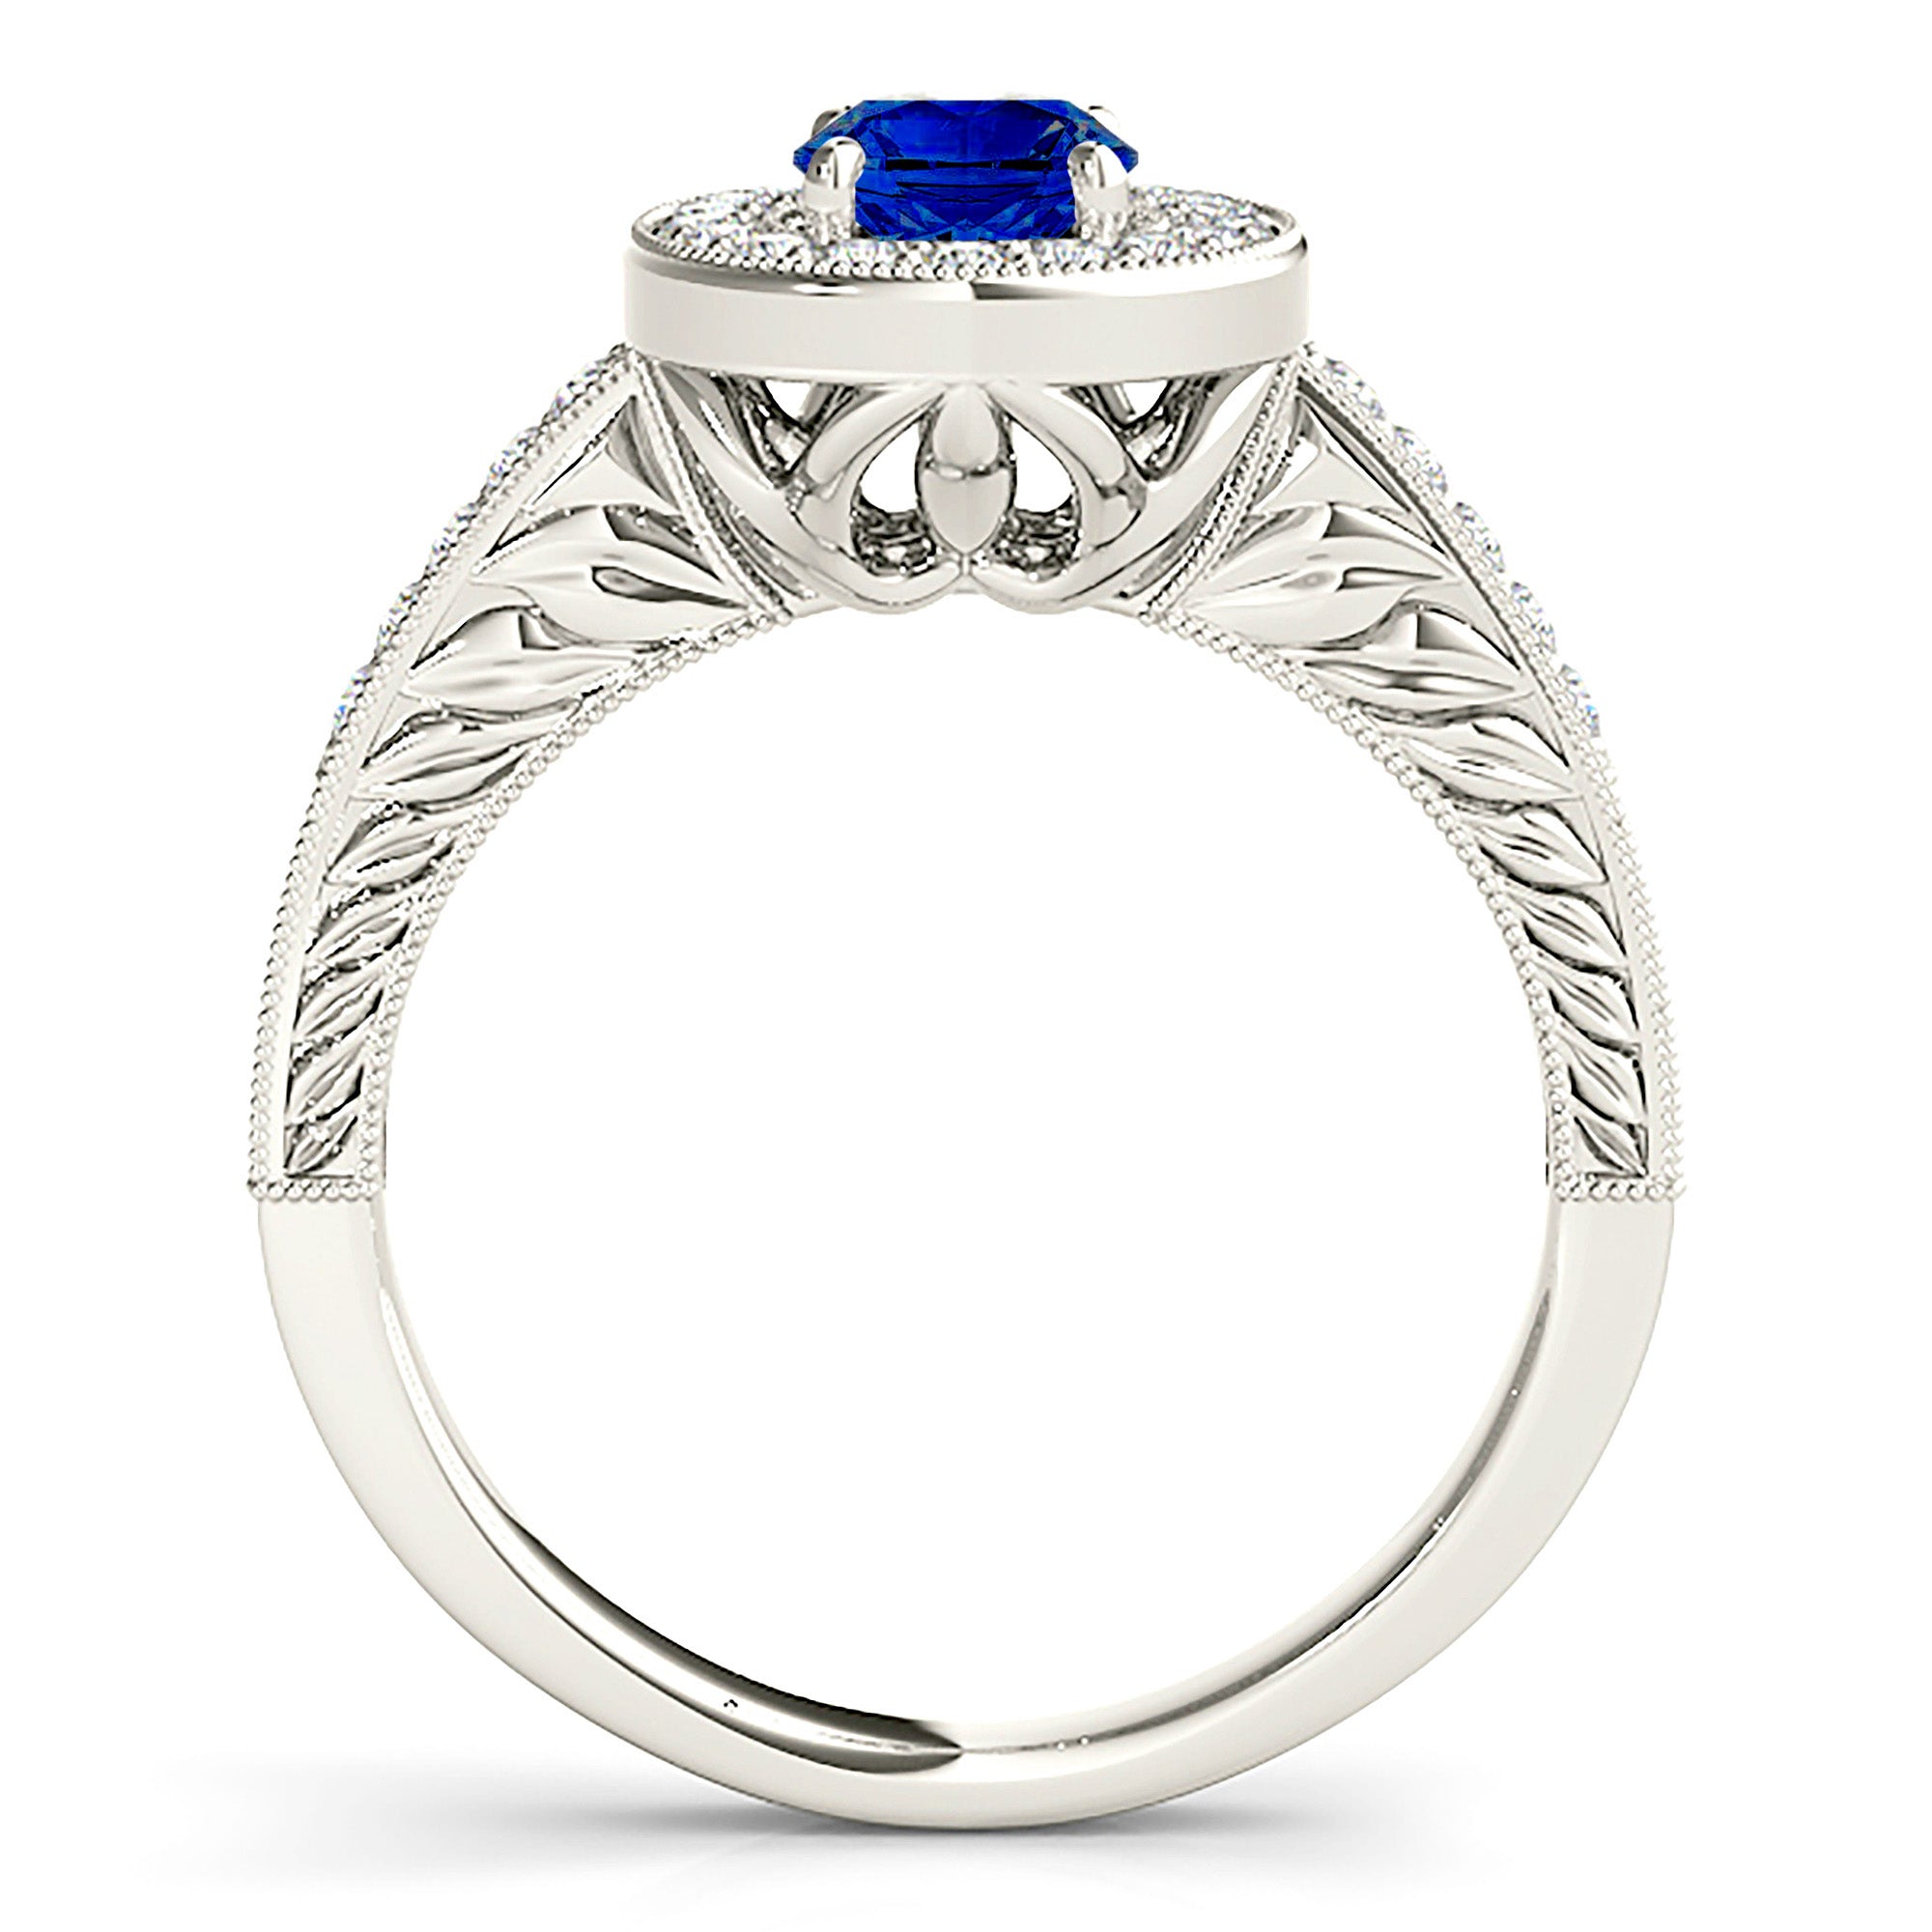 2.09 ct. Genuine Blue Oval Sapphire Ring With 0.35 ctw. Diamond Halo, Milgrain Diamond Band,Filigree Side Accent |Sapphire And Diamond Ring-in 14K/18K White, Yellow, Rose Gold and Platinum - Christmas Jewelry Gift -VIRABYANI